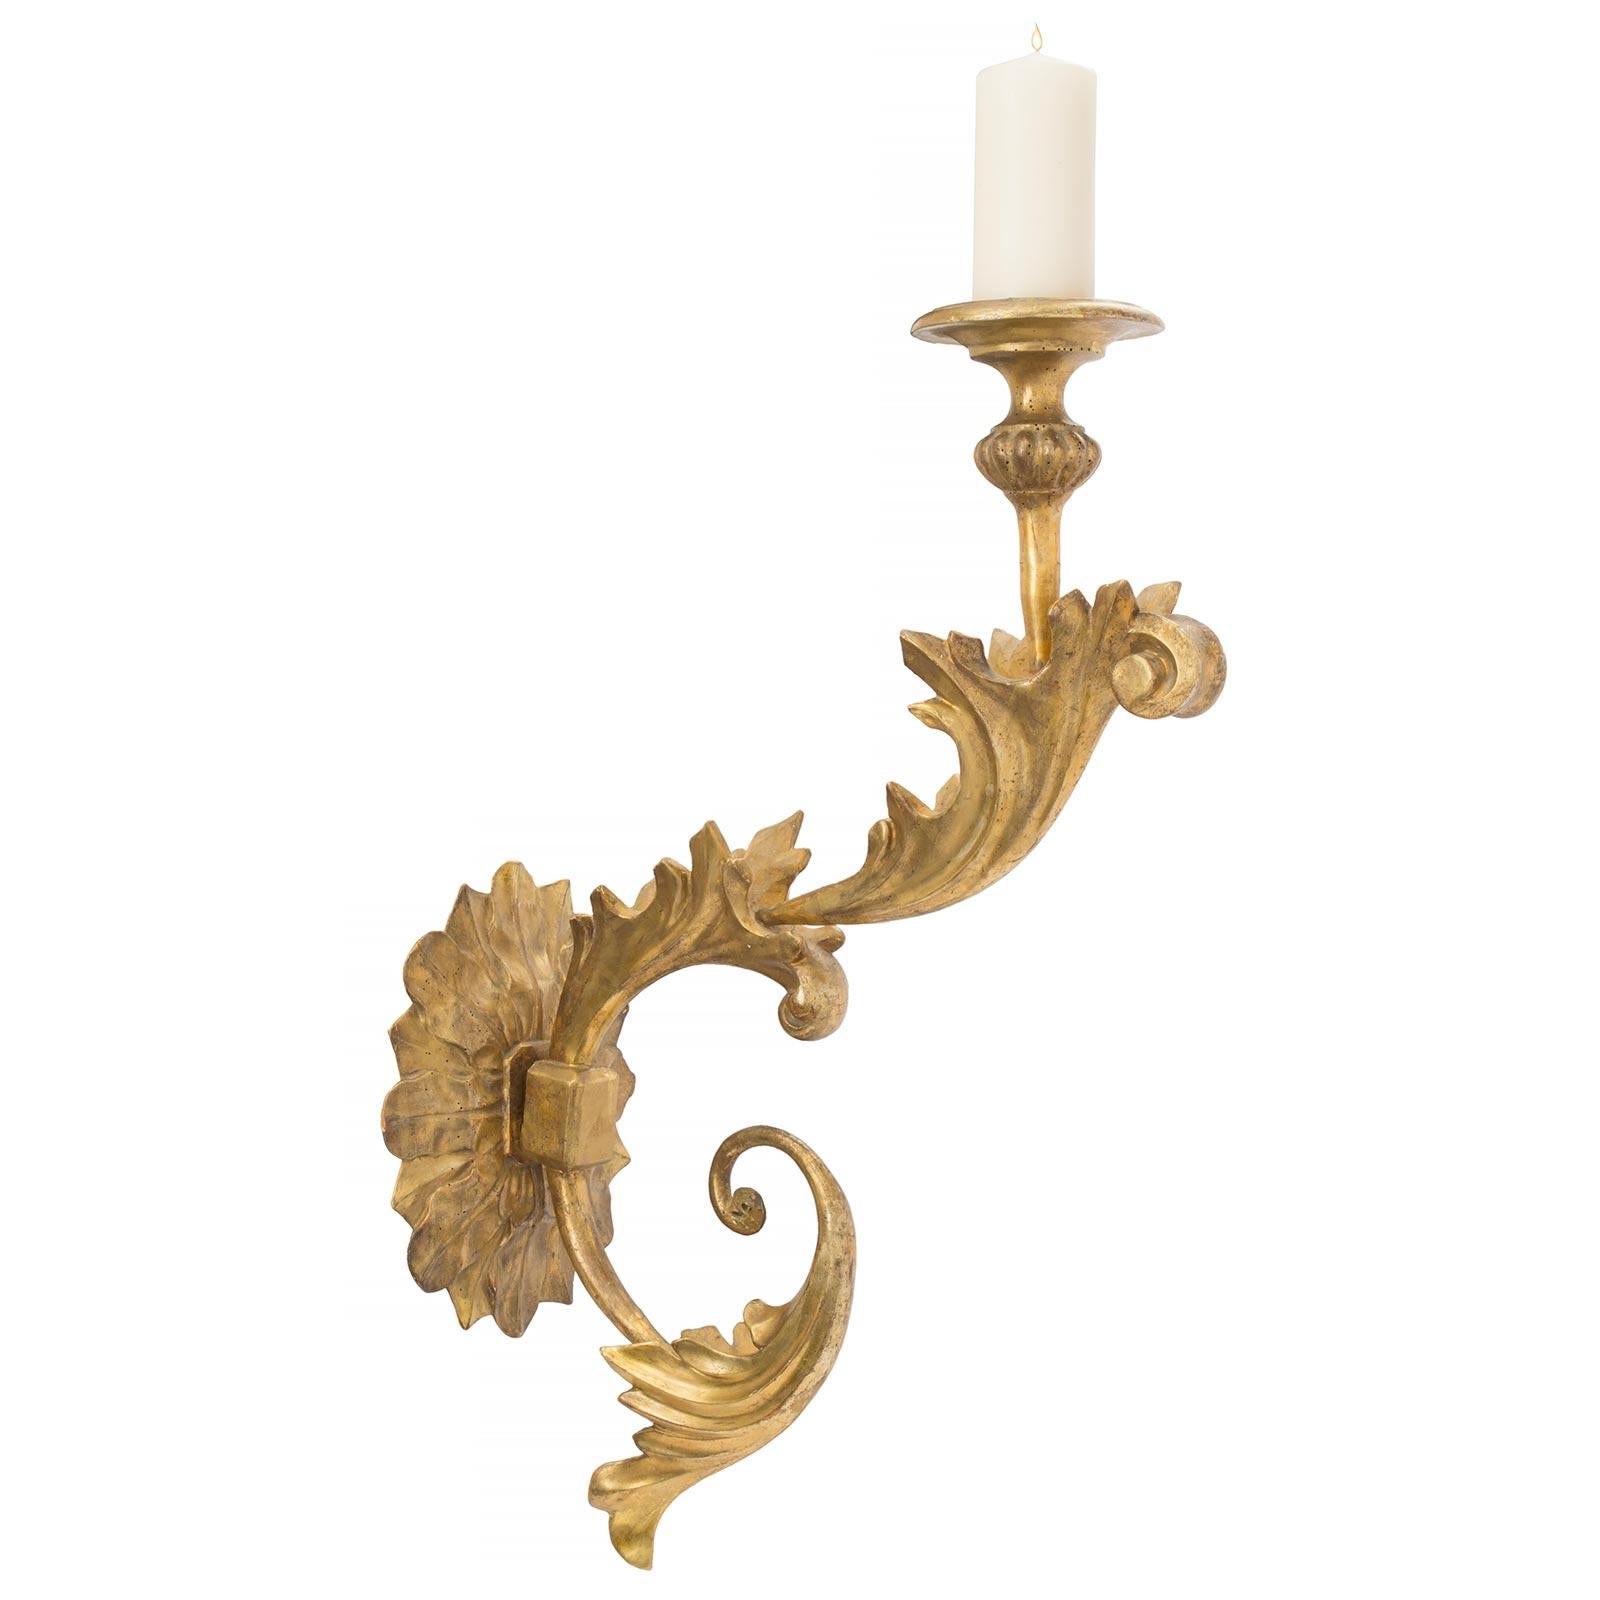 A very decorative and large scale pair of Italian early 19th century giltwood Bras de Lumière sconces. Each sconce has an attractive oval foliate gilt back plate supporting the impressive and fanciful ’S’ scrolled arm. The arm has three large